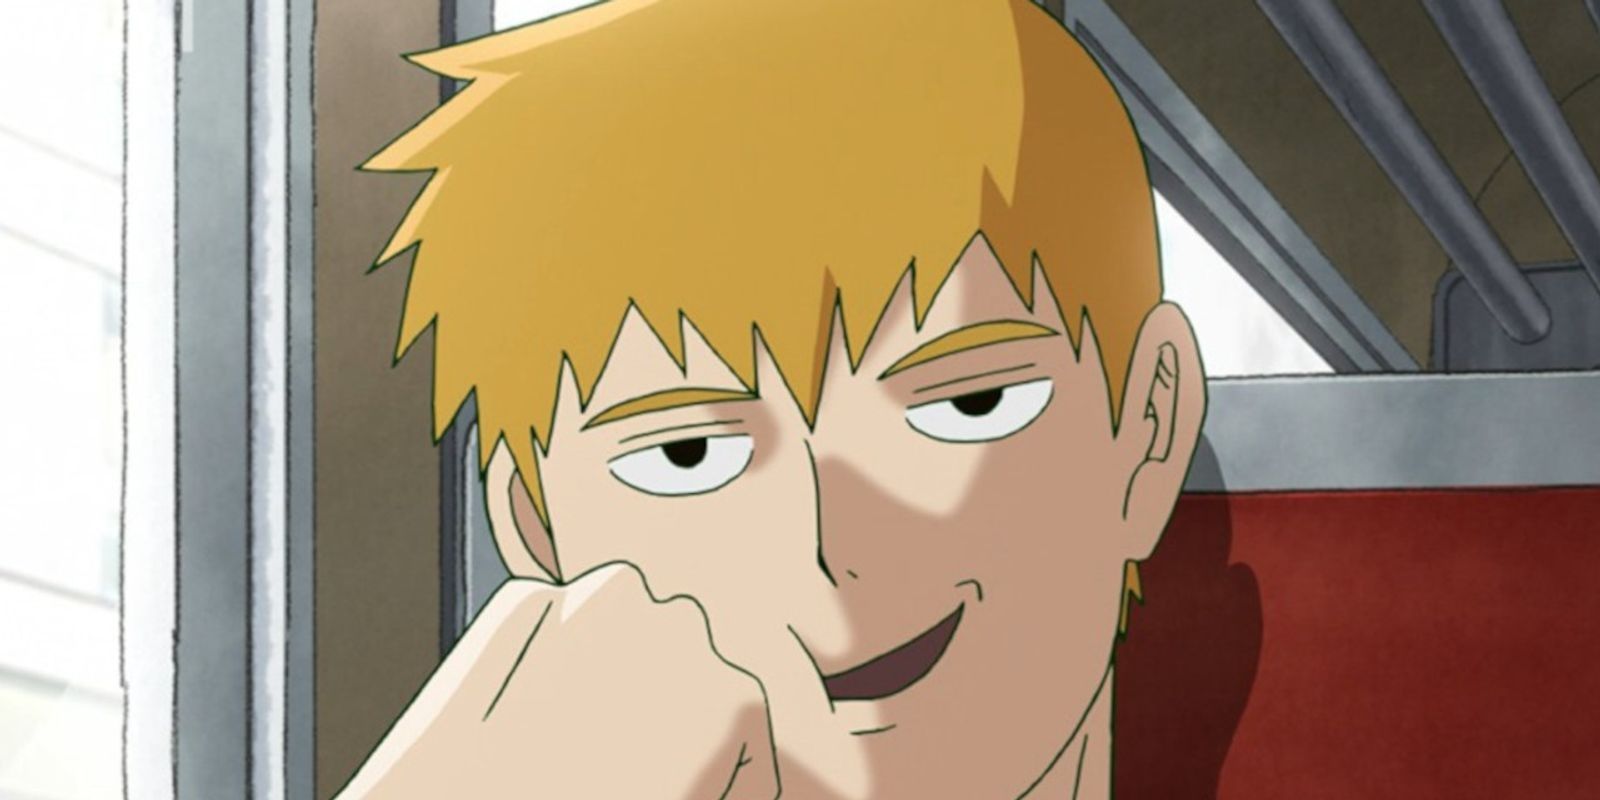 Arataka Reigen is talking casually with a fist against his cheek